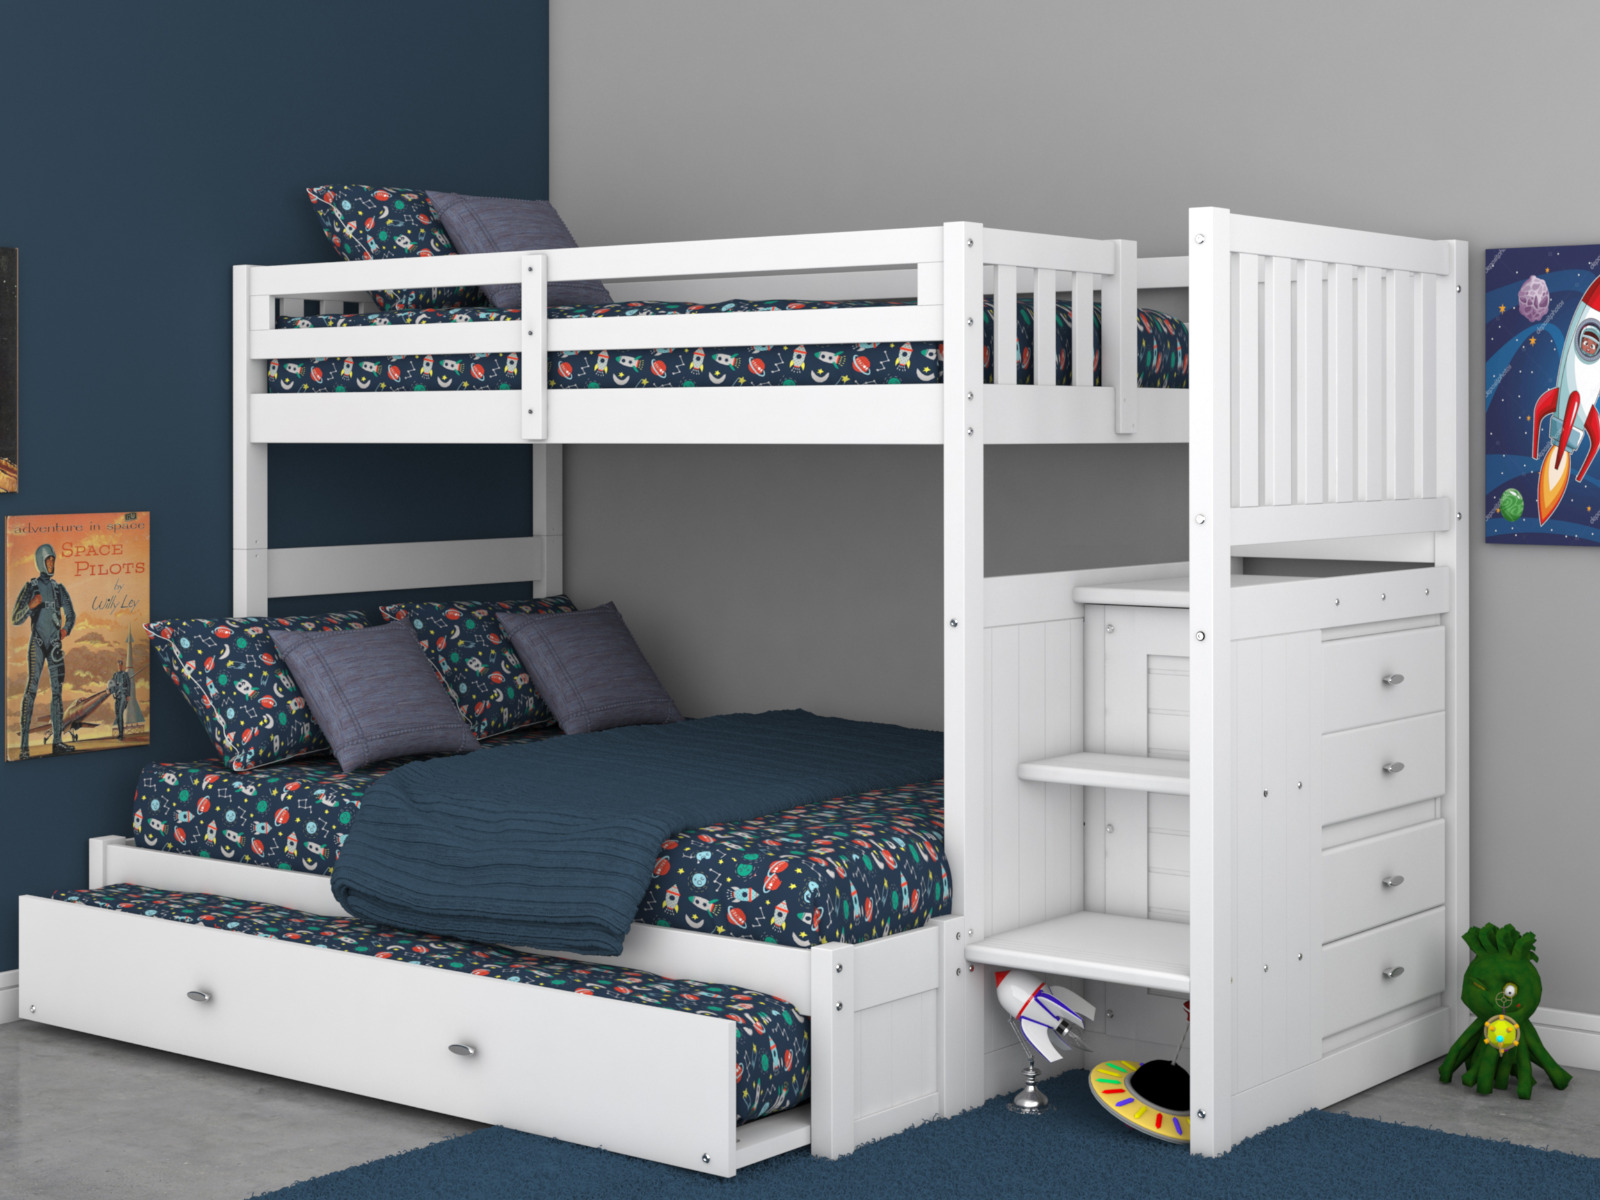 Discovery World Furniture White, Viv And Rae Bunk Bed Reviews